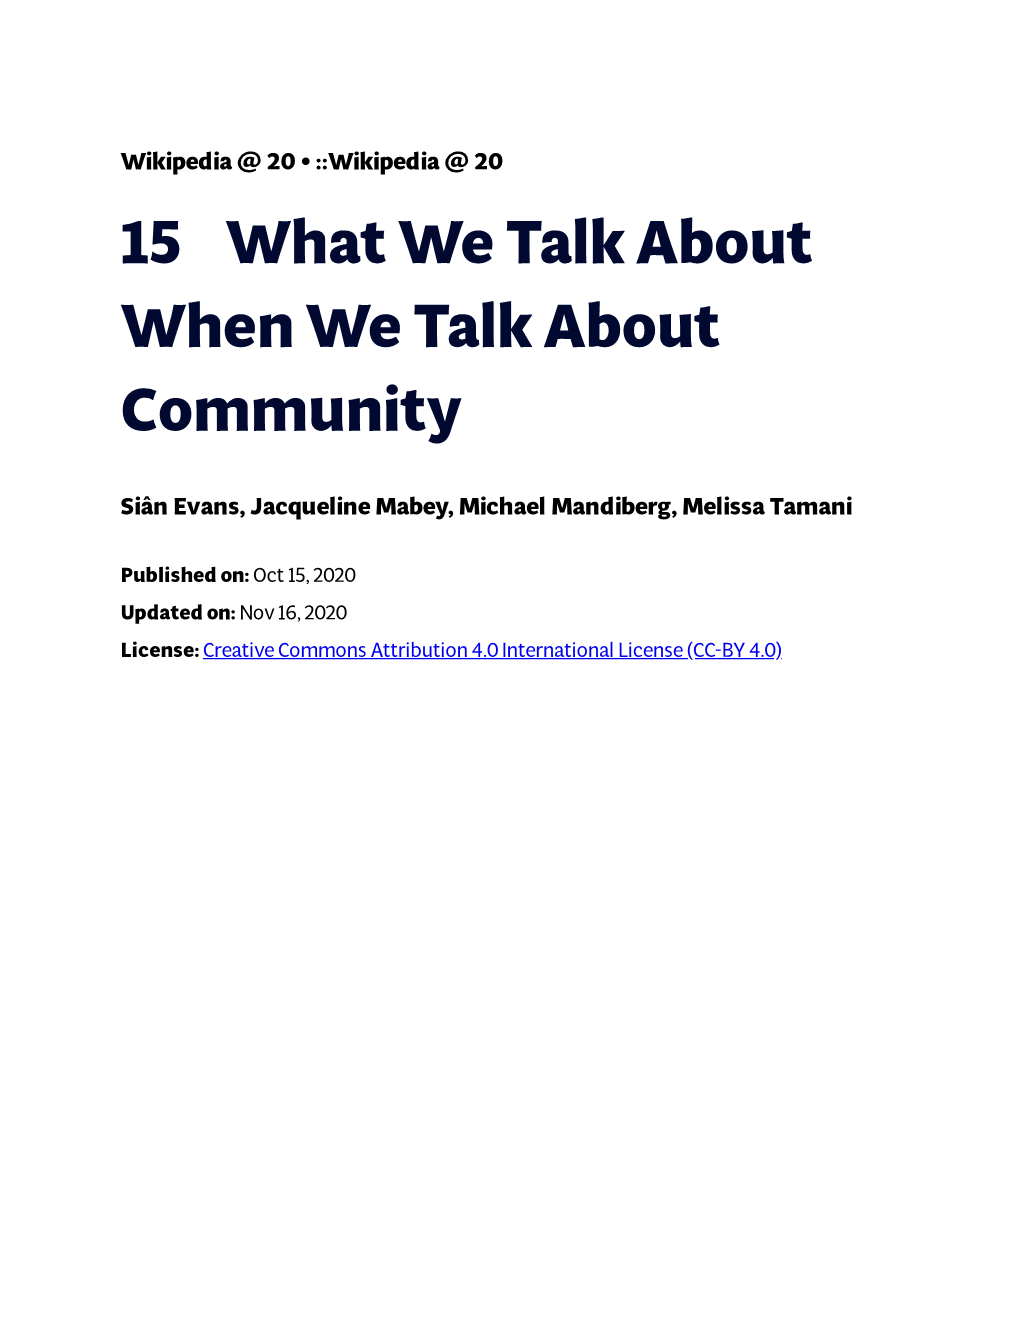 15€€€€What We Talk About When We Talk About Community